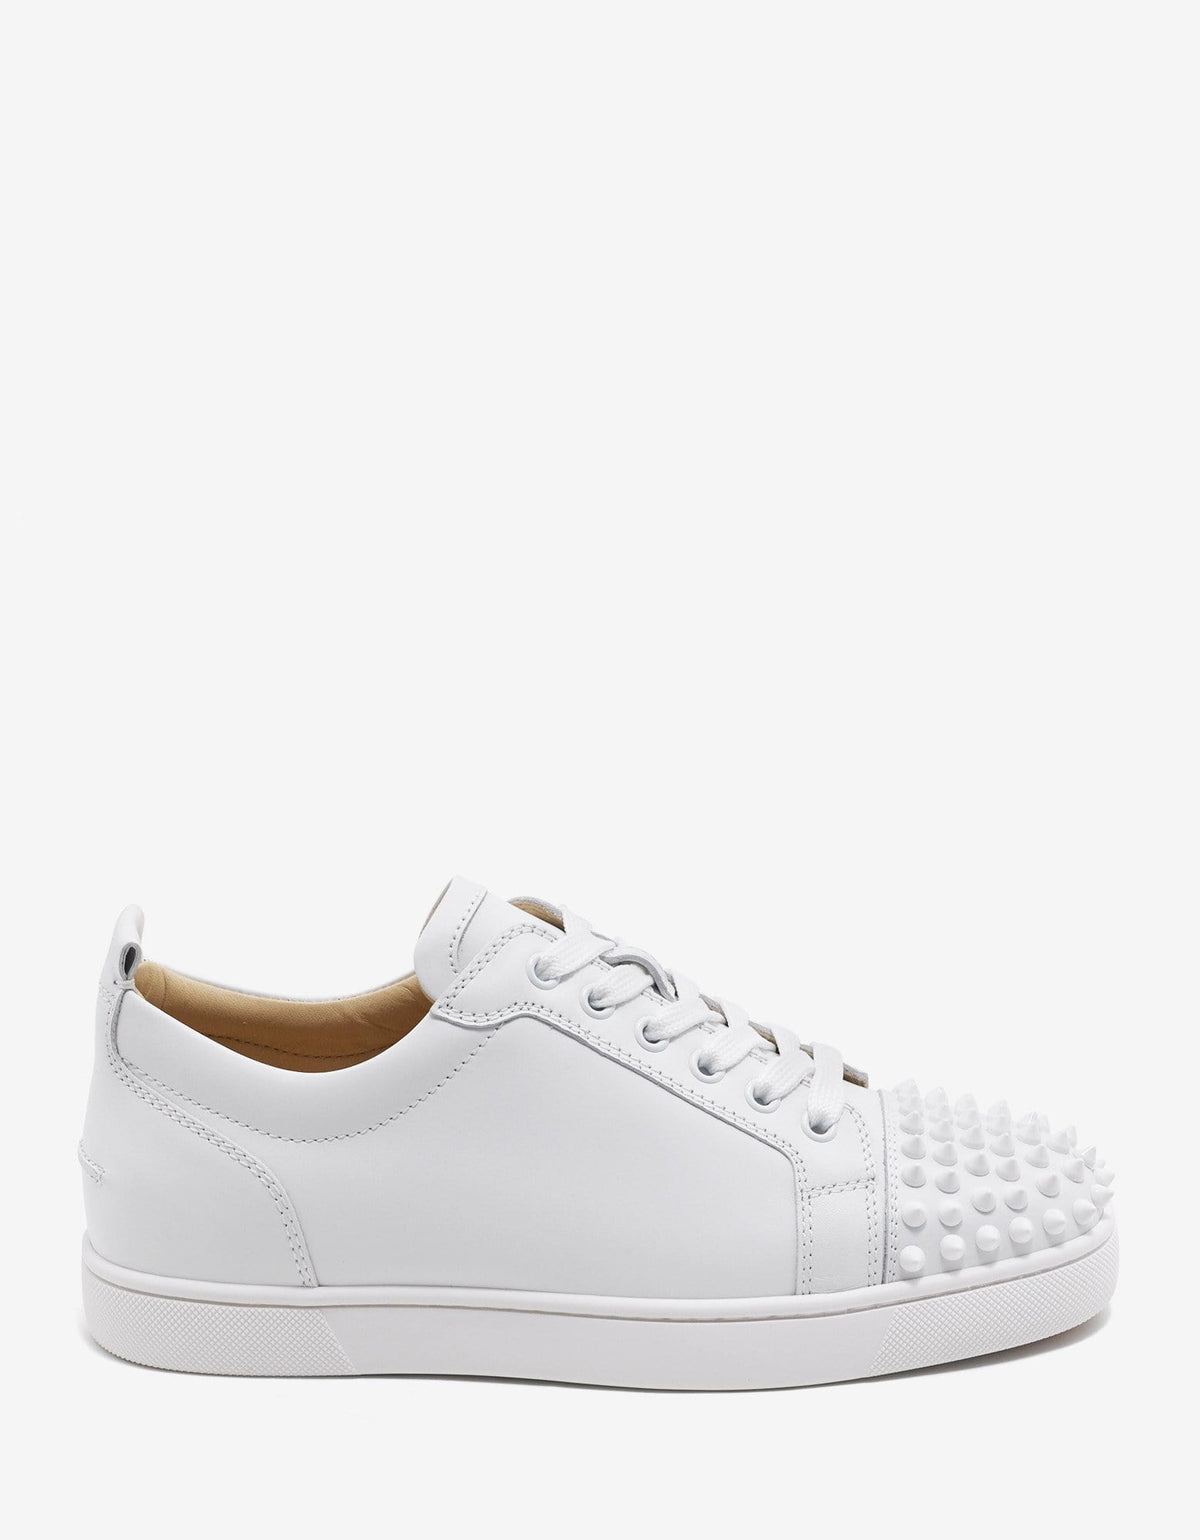 Christian Louboutin Louis Junior Spikes Flat White Leather Trainers -